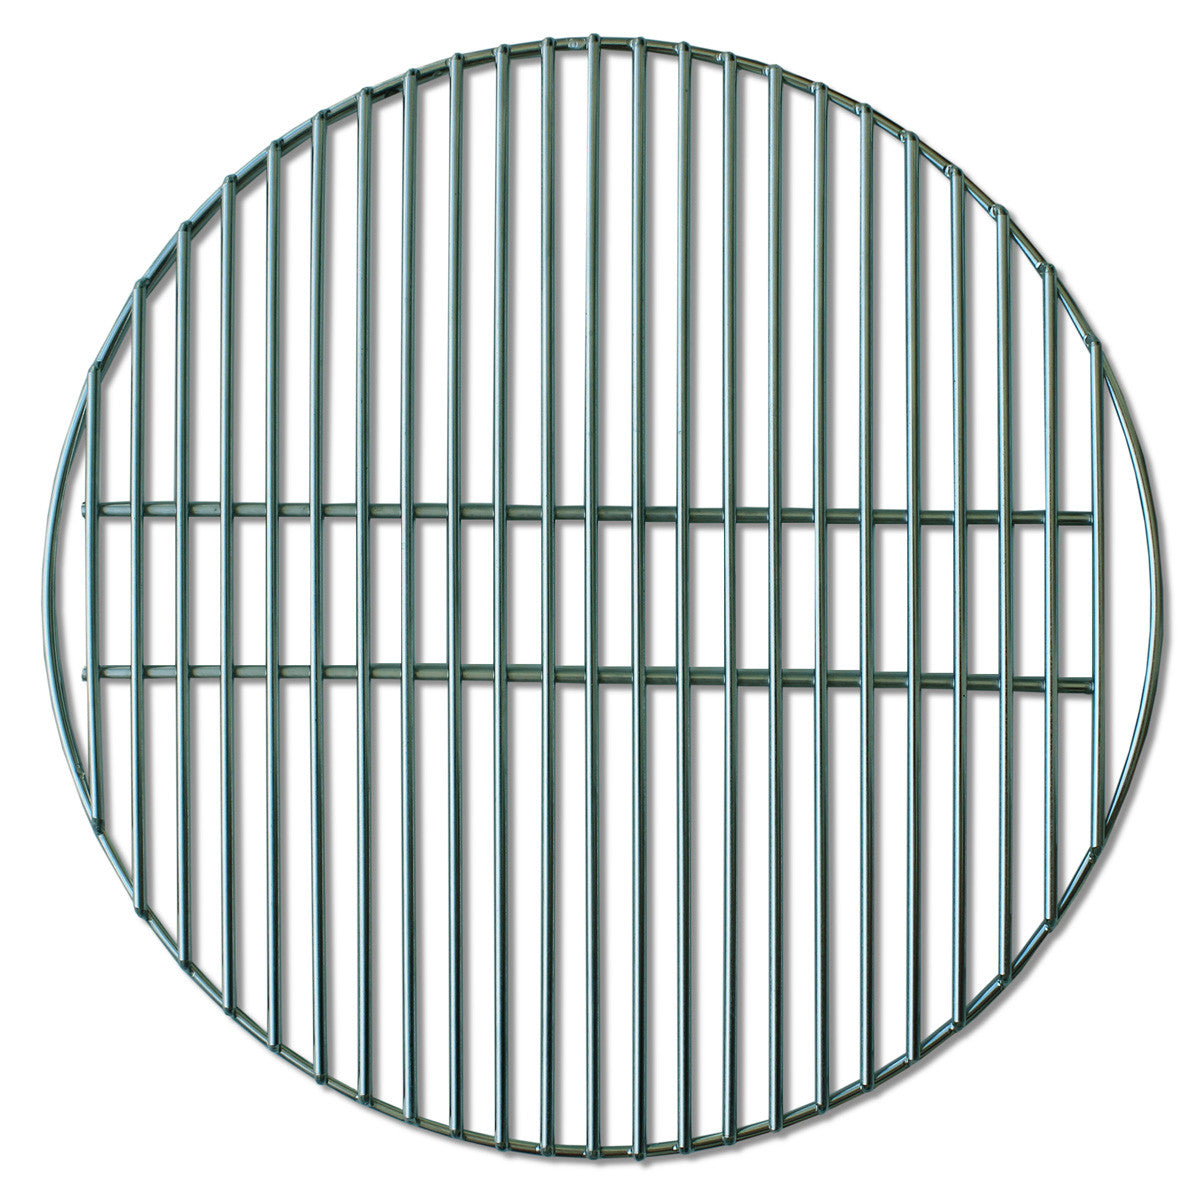 Heavy Stainless Steel Grill Grates - Sizes Available Smokeware